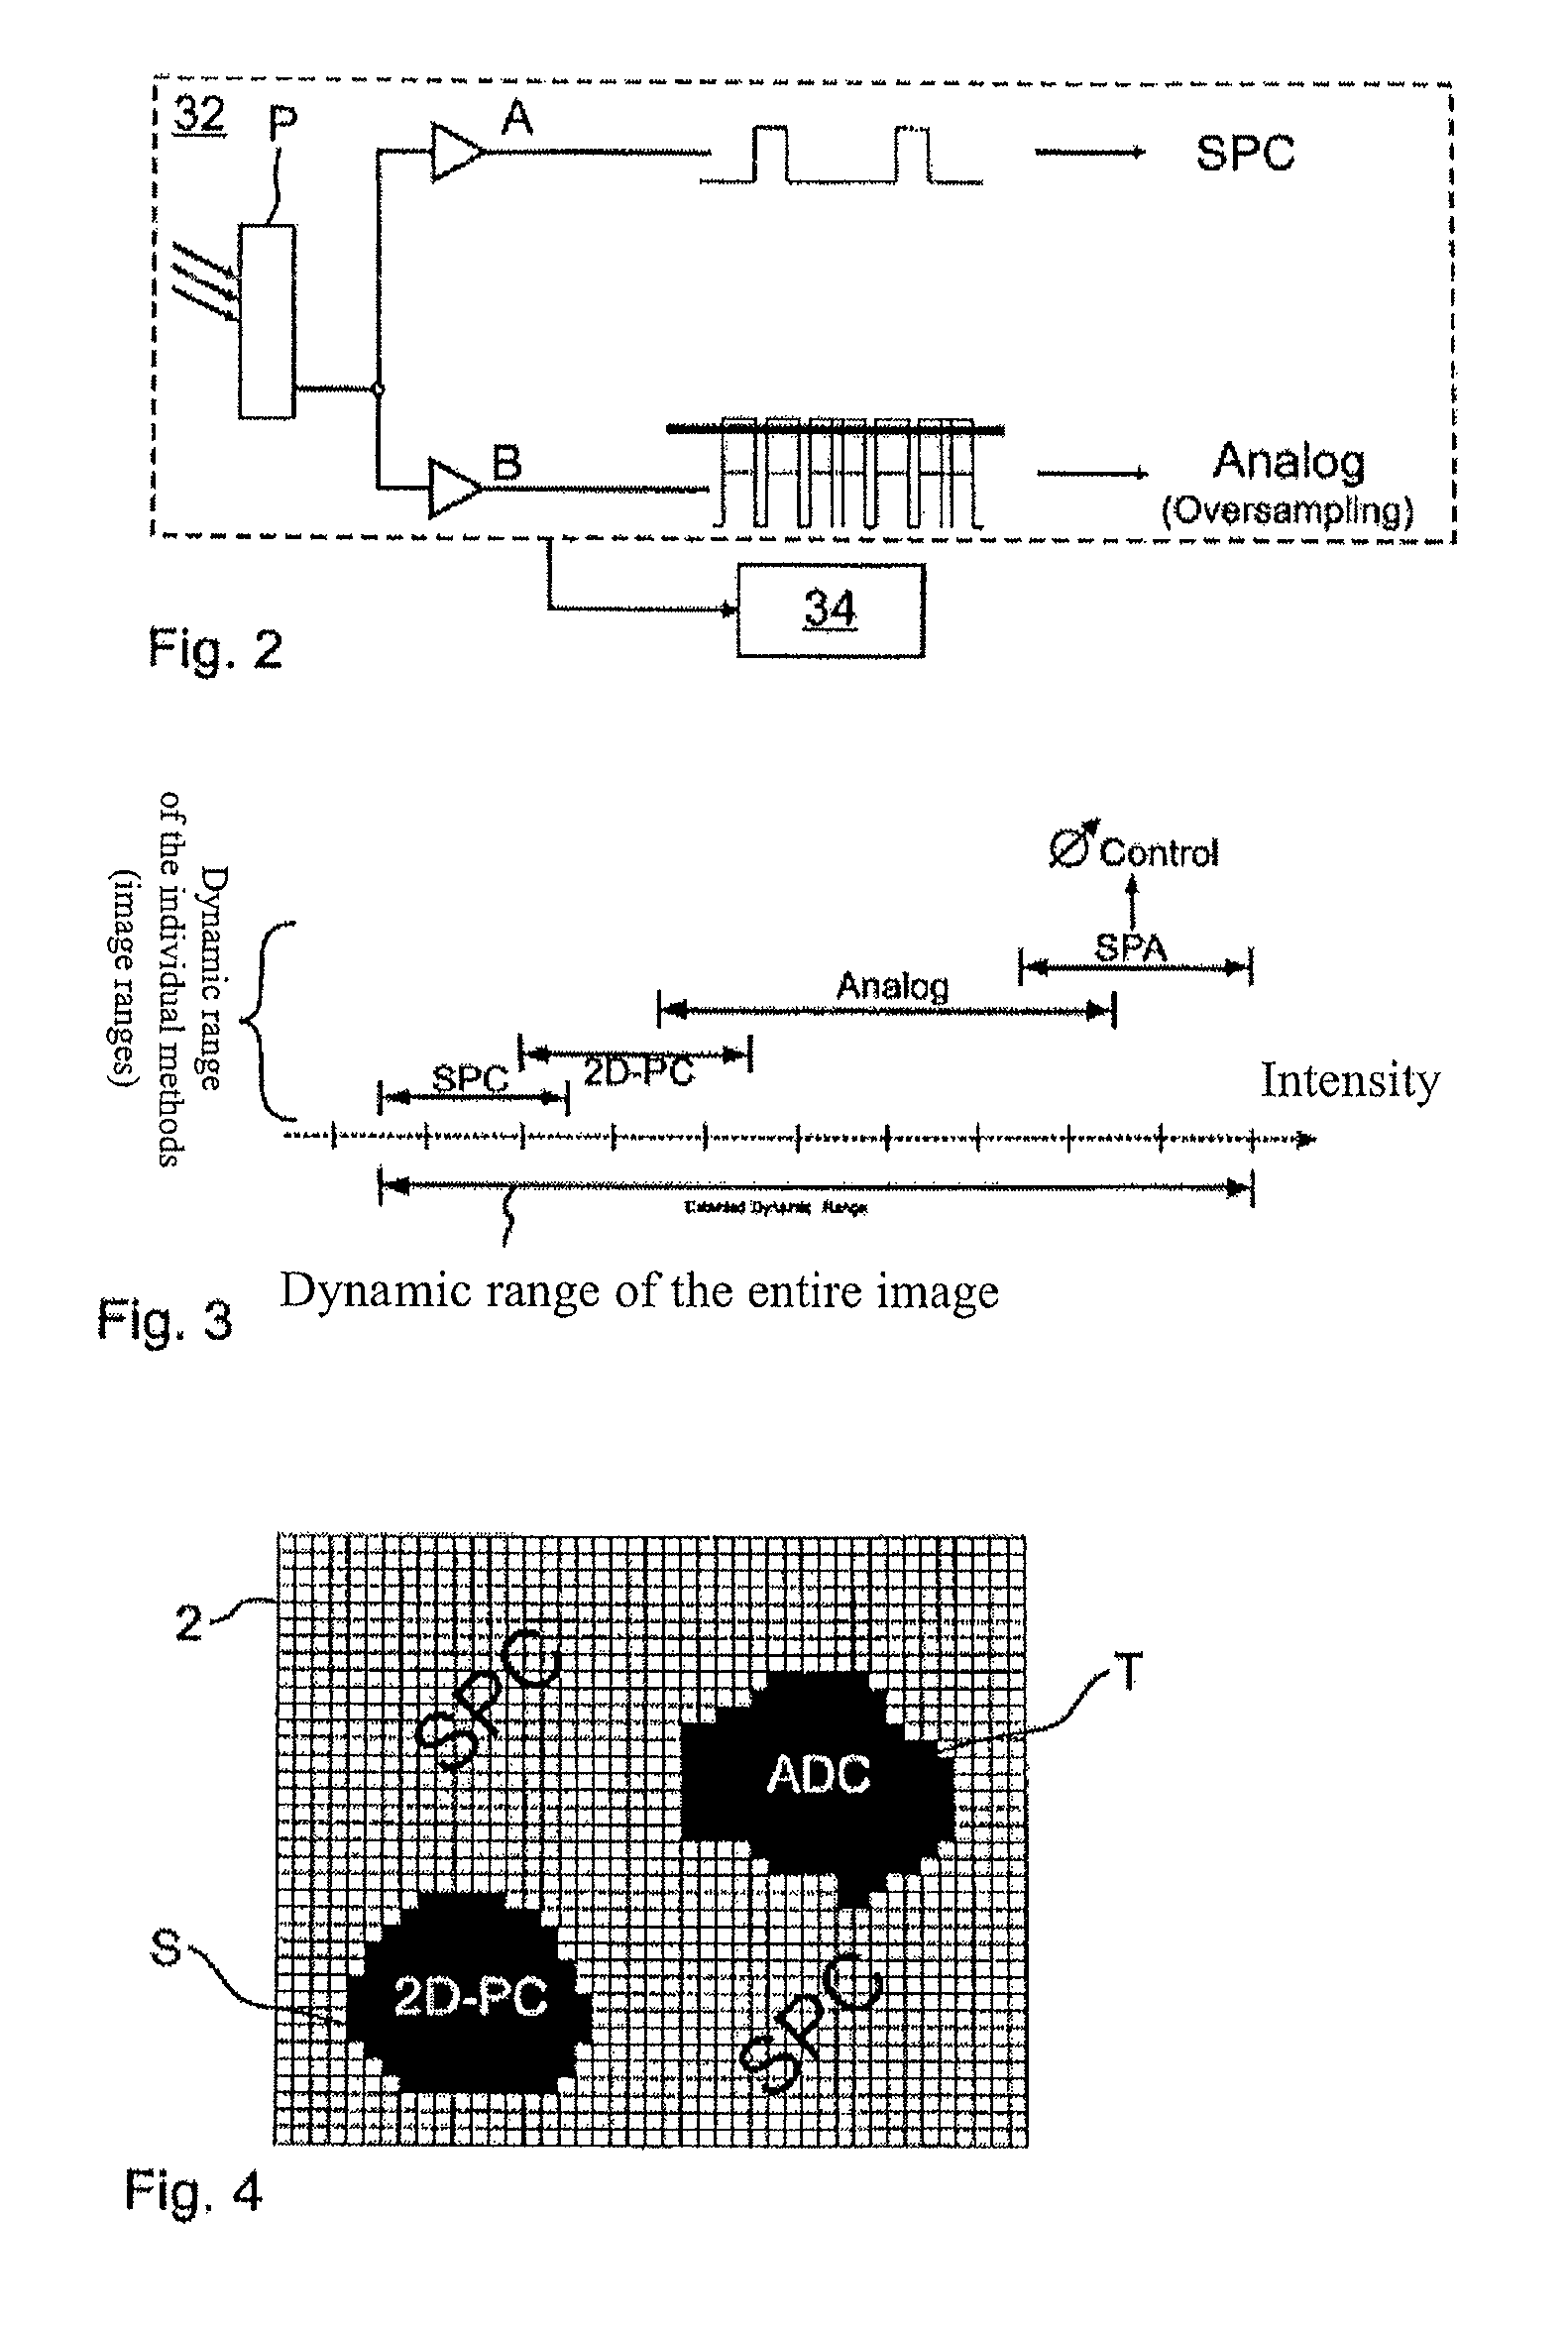 Method for generating images with an expanded dynamic range and optical device for carrying out such a method, in particular a laser scanner microscope